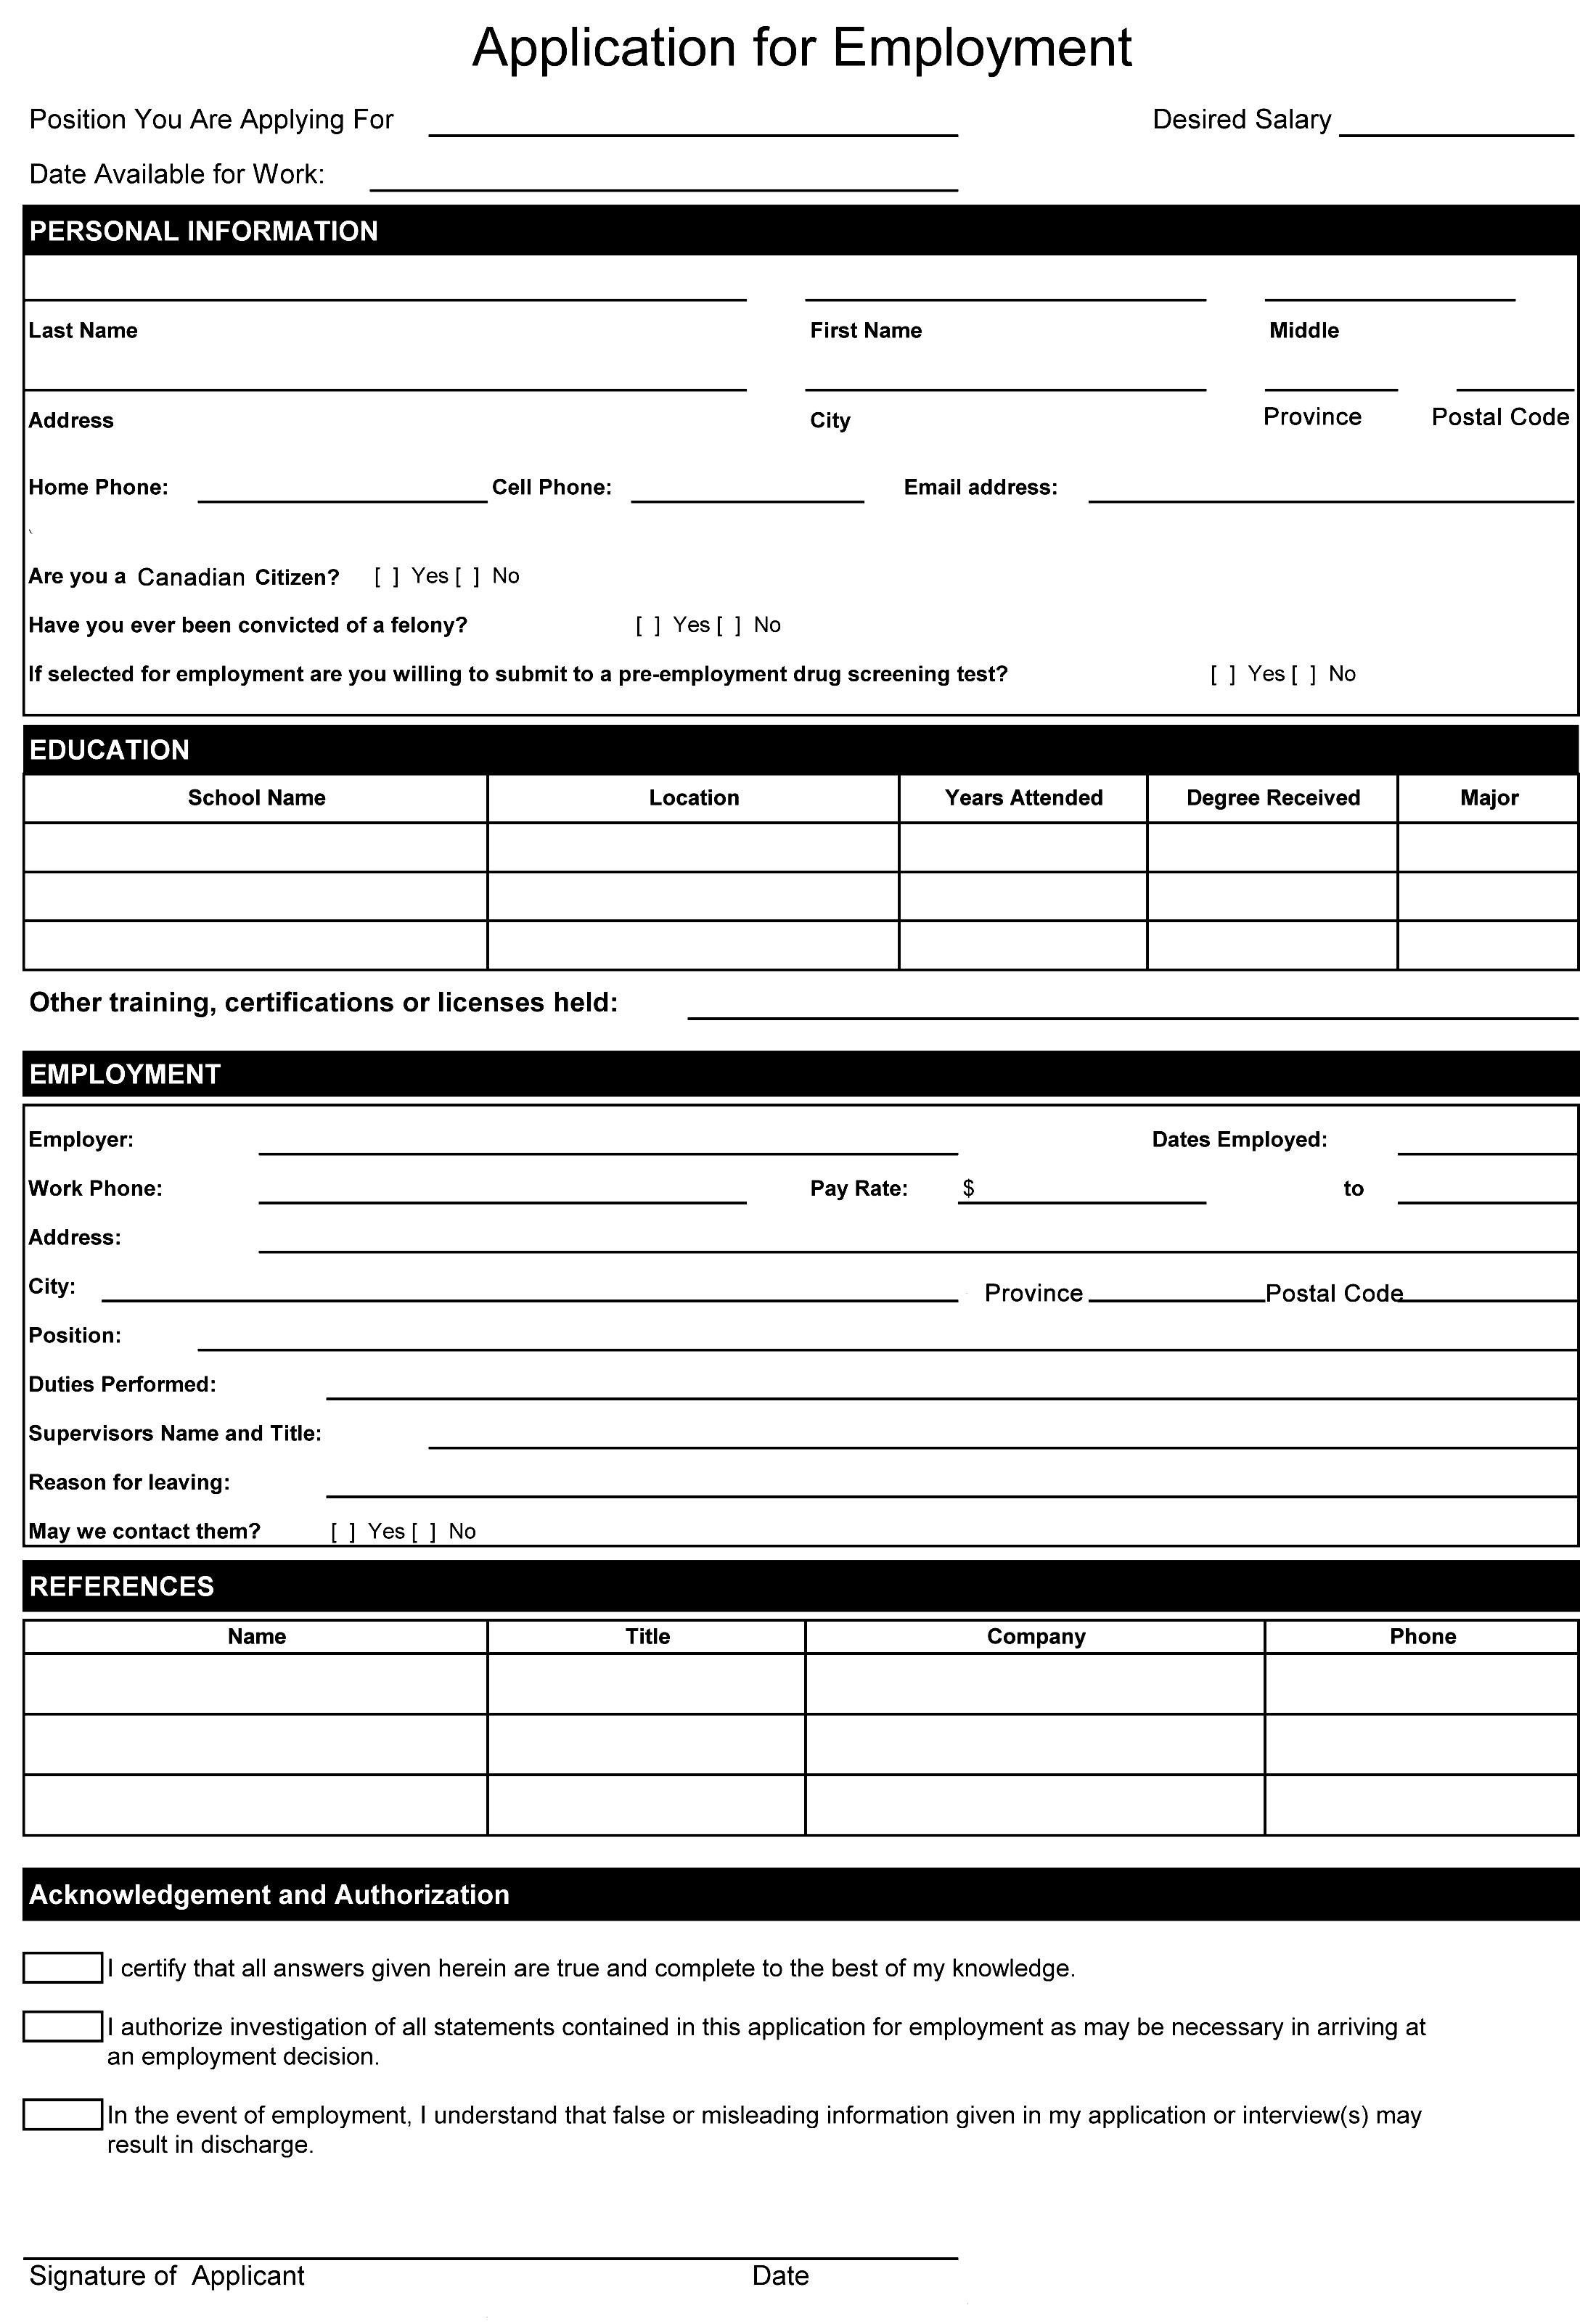 Resume Format Word Document | Resume Format | Job Application Form - Free Printable Employment Application